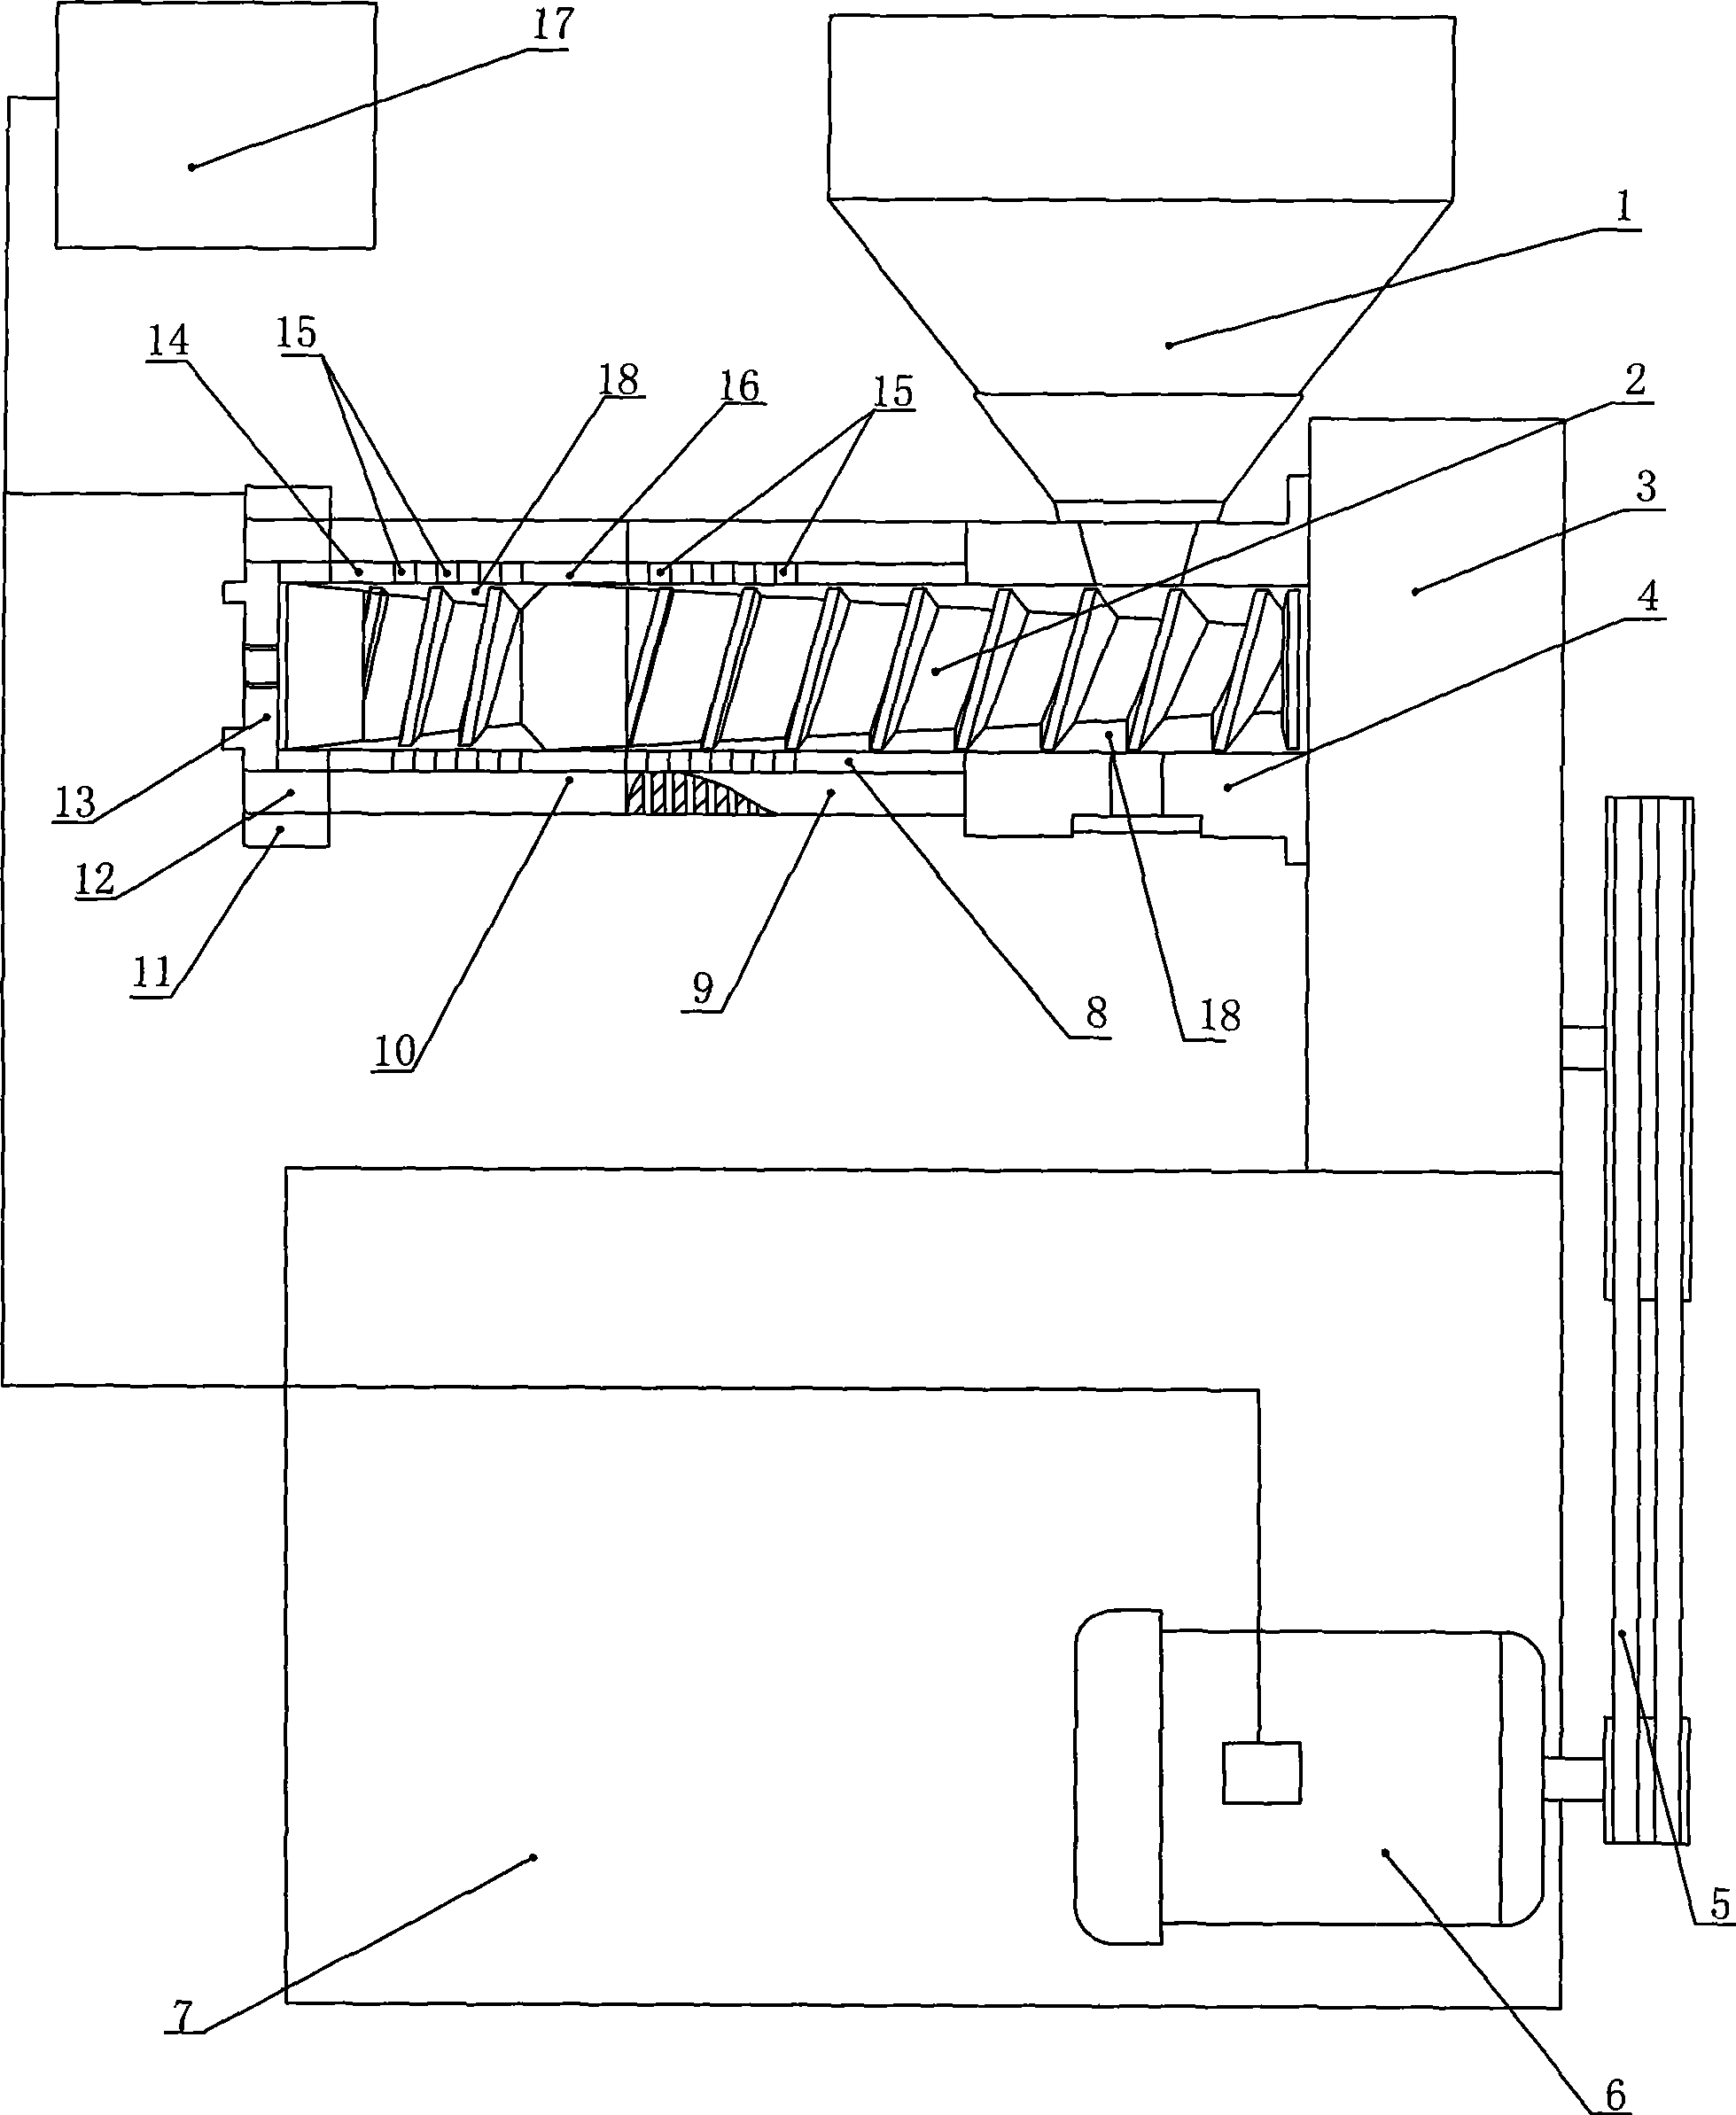 A frequency and speed modulating multi-ring oil mill